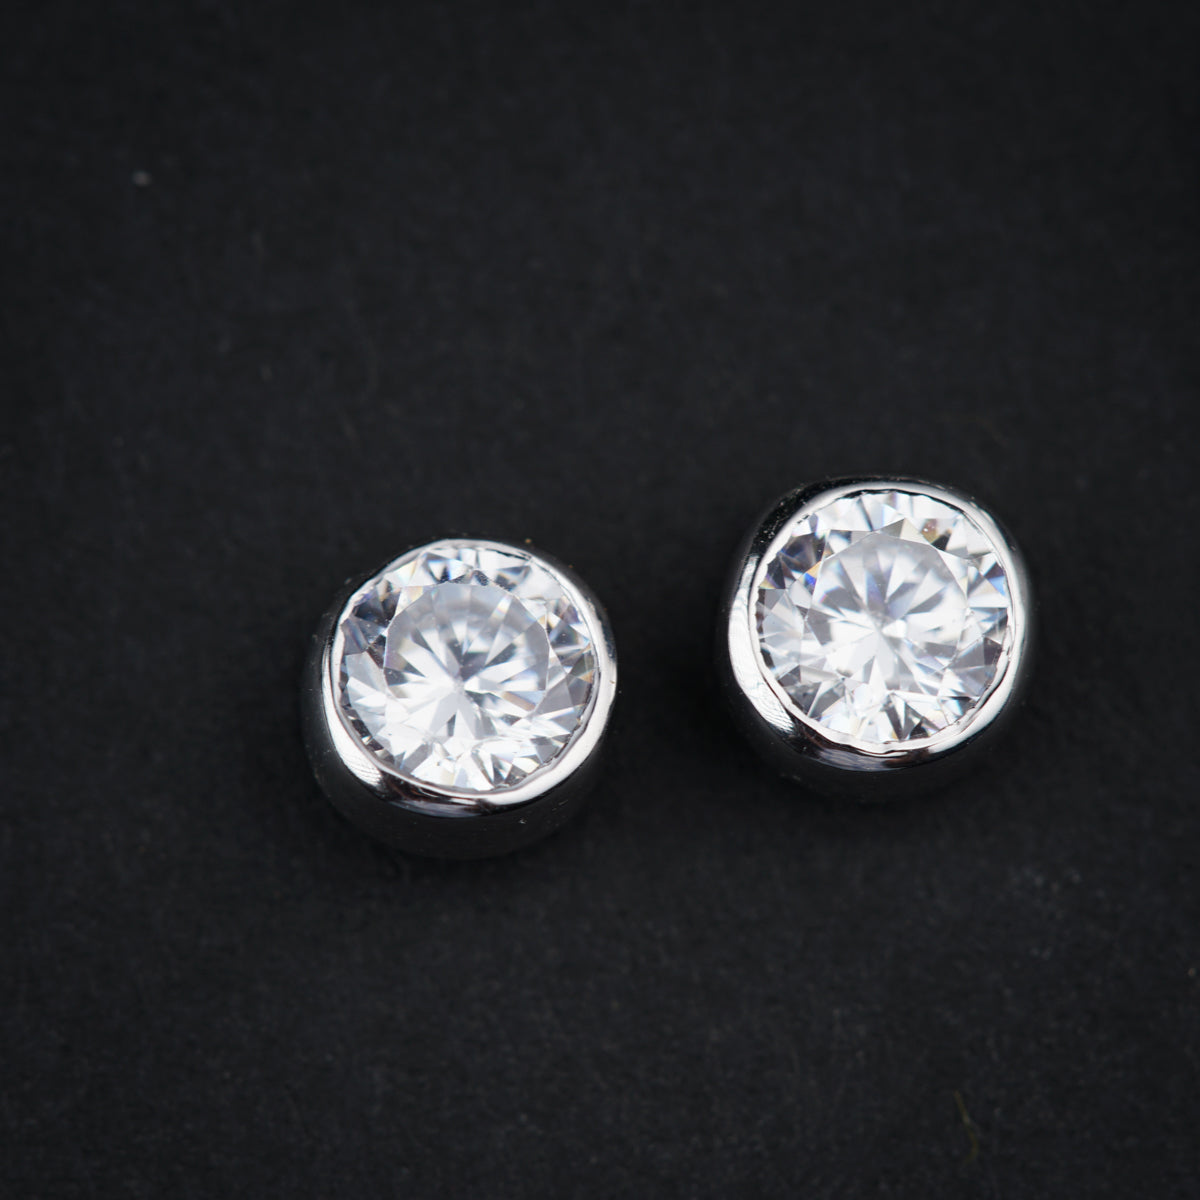 a pair of diamond studs on a black surface